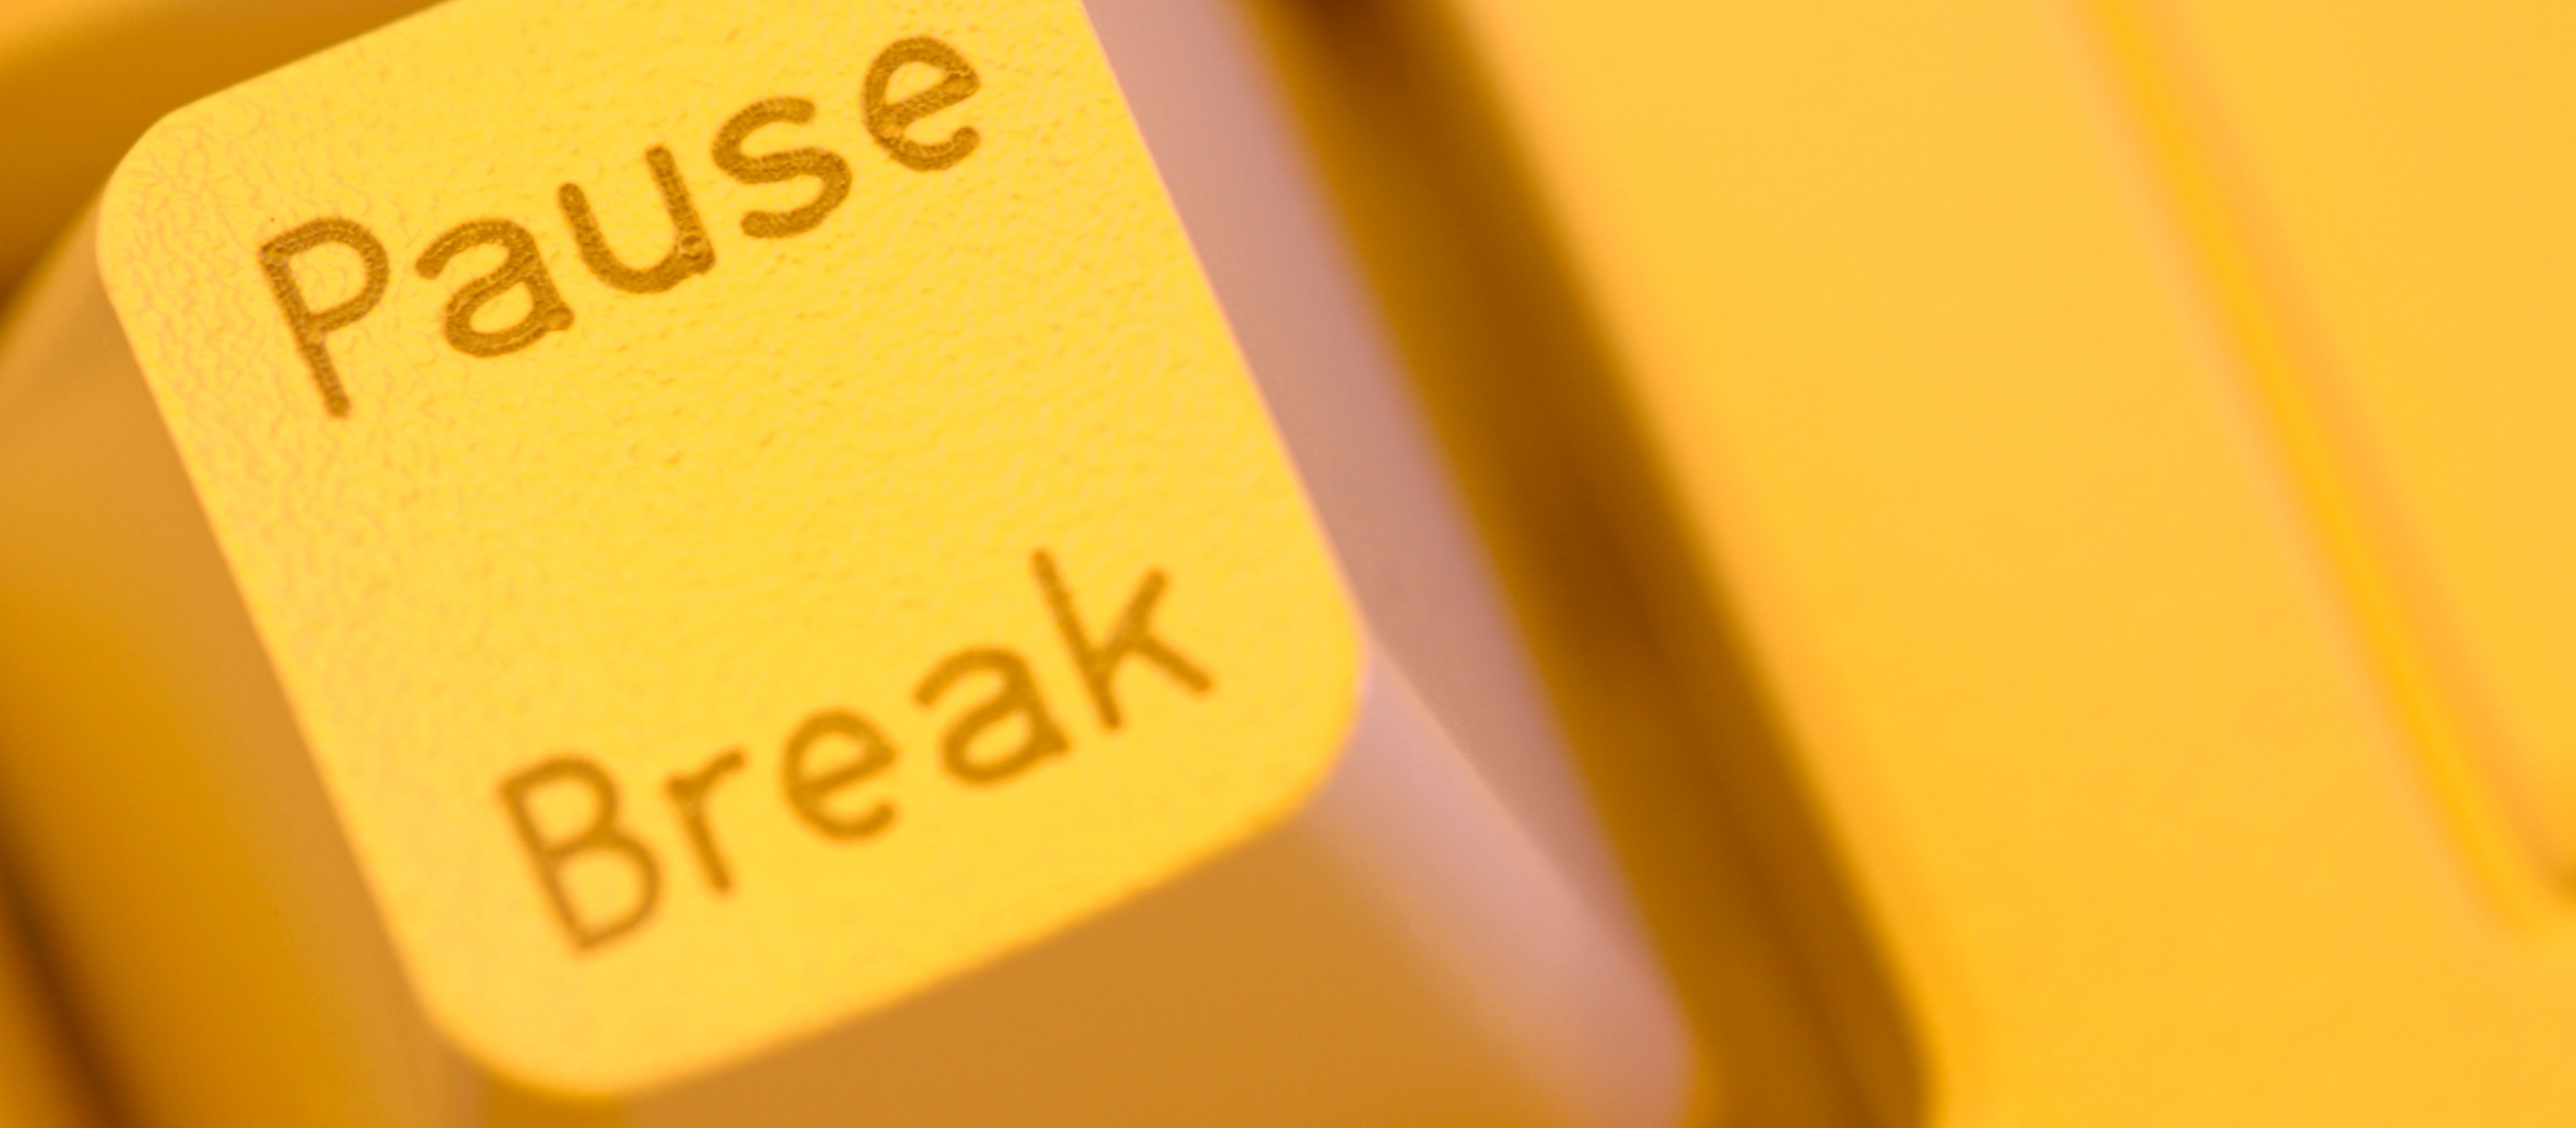 Photo of the pause/break button on a computer keyboard